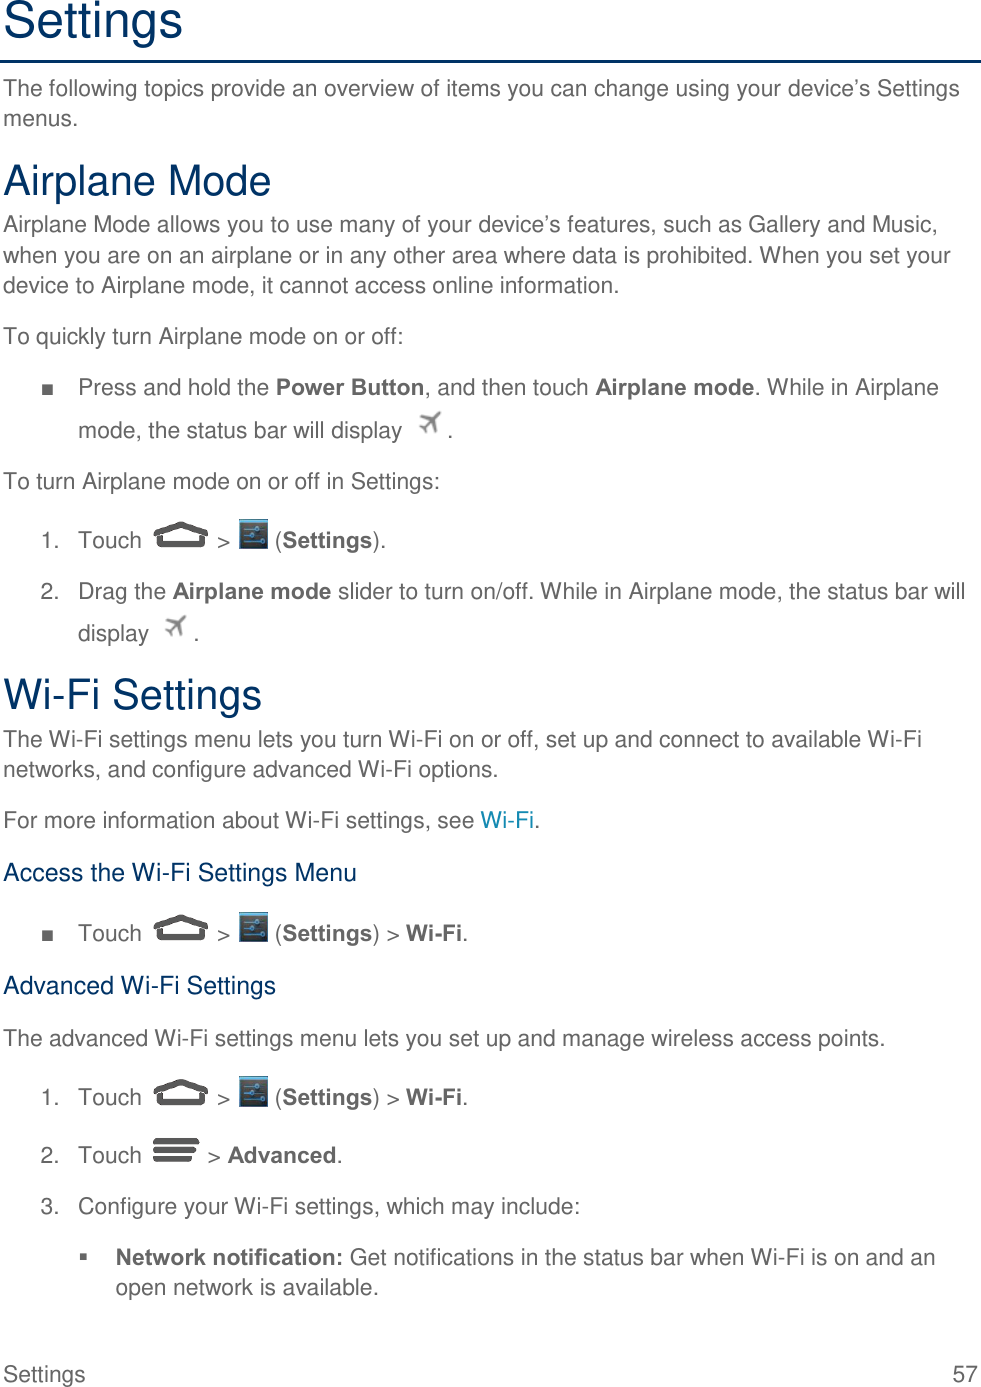  Settings  57 Settings The following topics provide an overview of items you can change using your device’s Settings menus. Airplane Mode Airplane Mode allows you to use many of your device’s features, such as Gallery and Music, when you are on an airplane or in any other area where data is prohibited. When you set your device to Airplane mode, it cannot access online information. To quickly turn Airplane mode on or off: ■  Press and hold the Power Button, and then touch Airplane mode. While in Airplane mode, the status bar will display  . To turn Airplane mode on or off in Settings: 1.  Touch   &gt;   (Settings). 2.  Drag the Airplane mode slider to turn on/off. While in Airplane mode, the status bar will display  . Wi-Fi Settings The Wi-Fi settings menu lets you turn Wi-Fi on or off, set up and connect to available Wi-Fi networks, and configure advanced Wi-Fi options. For more information about Wi-Fi settings, see Wi-Fi. Access the Wi-Fi Settings Menu ■  Touch   &gt;   (Settings) &gt; Wi-Fi. Advanced Wi-Fi Settings The advanced Wi-Fi settings menu lets you set up and manage wireless access points. 1.  Touch   &gt;   (Settings) &gt; Wi-Fi. 2.  Touch   &gt; Advanced. 3.  Configure your Wi-Fi settings, which may include:  Network notification: Get notifications in the status bar when Wi-Fi is on and an open network is available. 